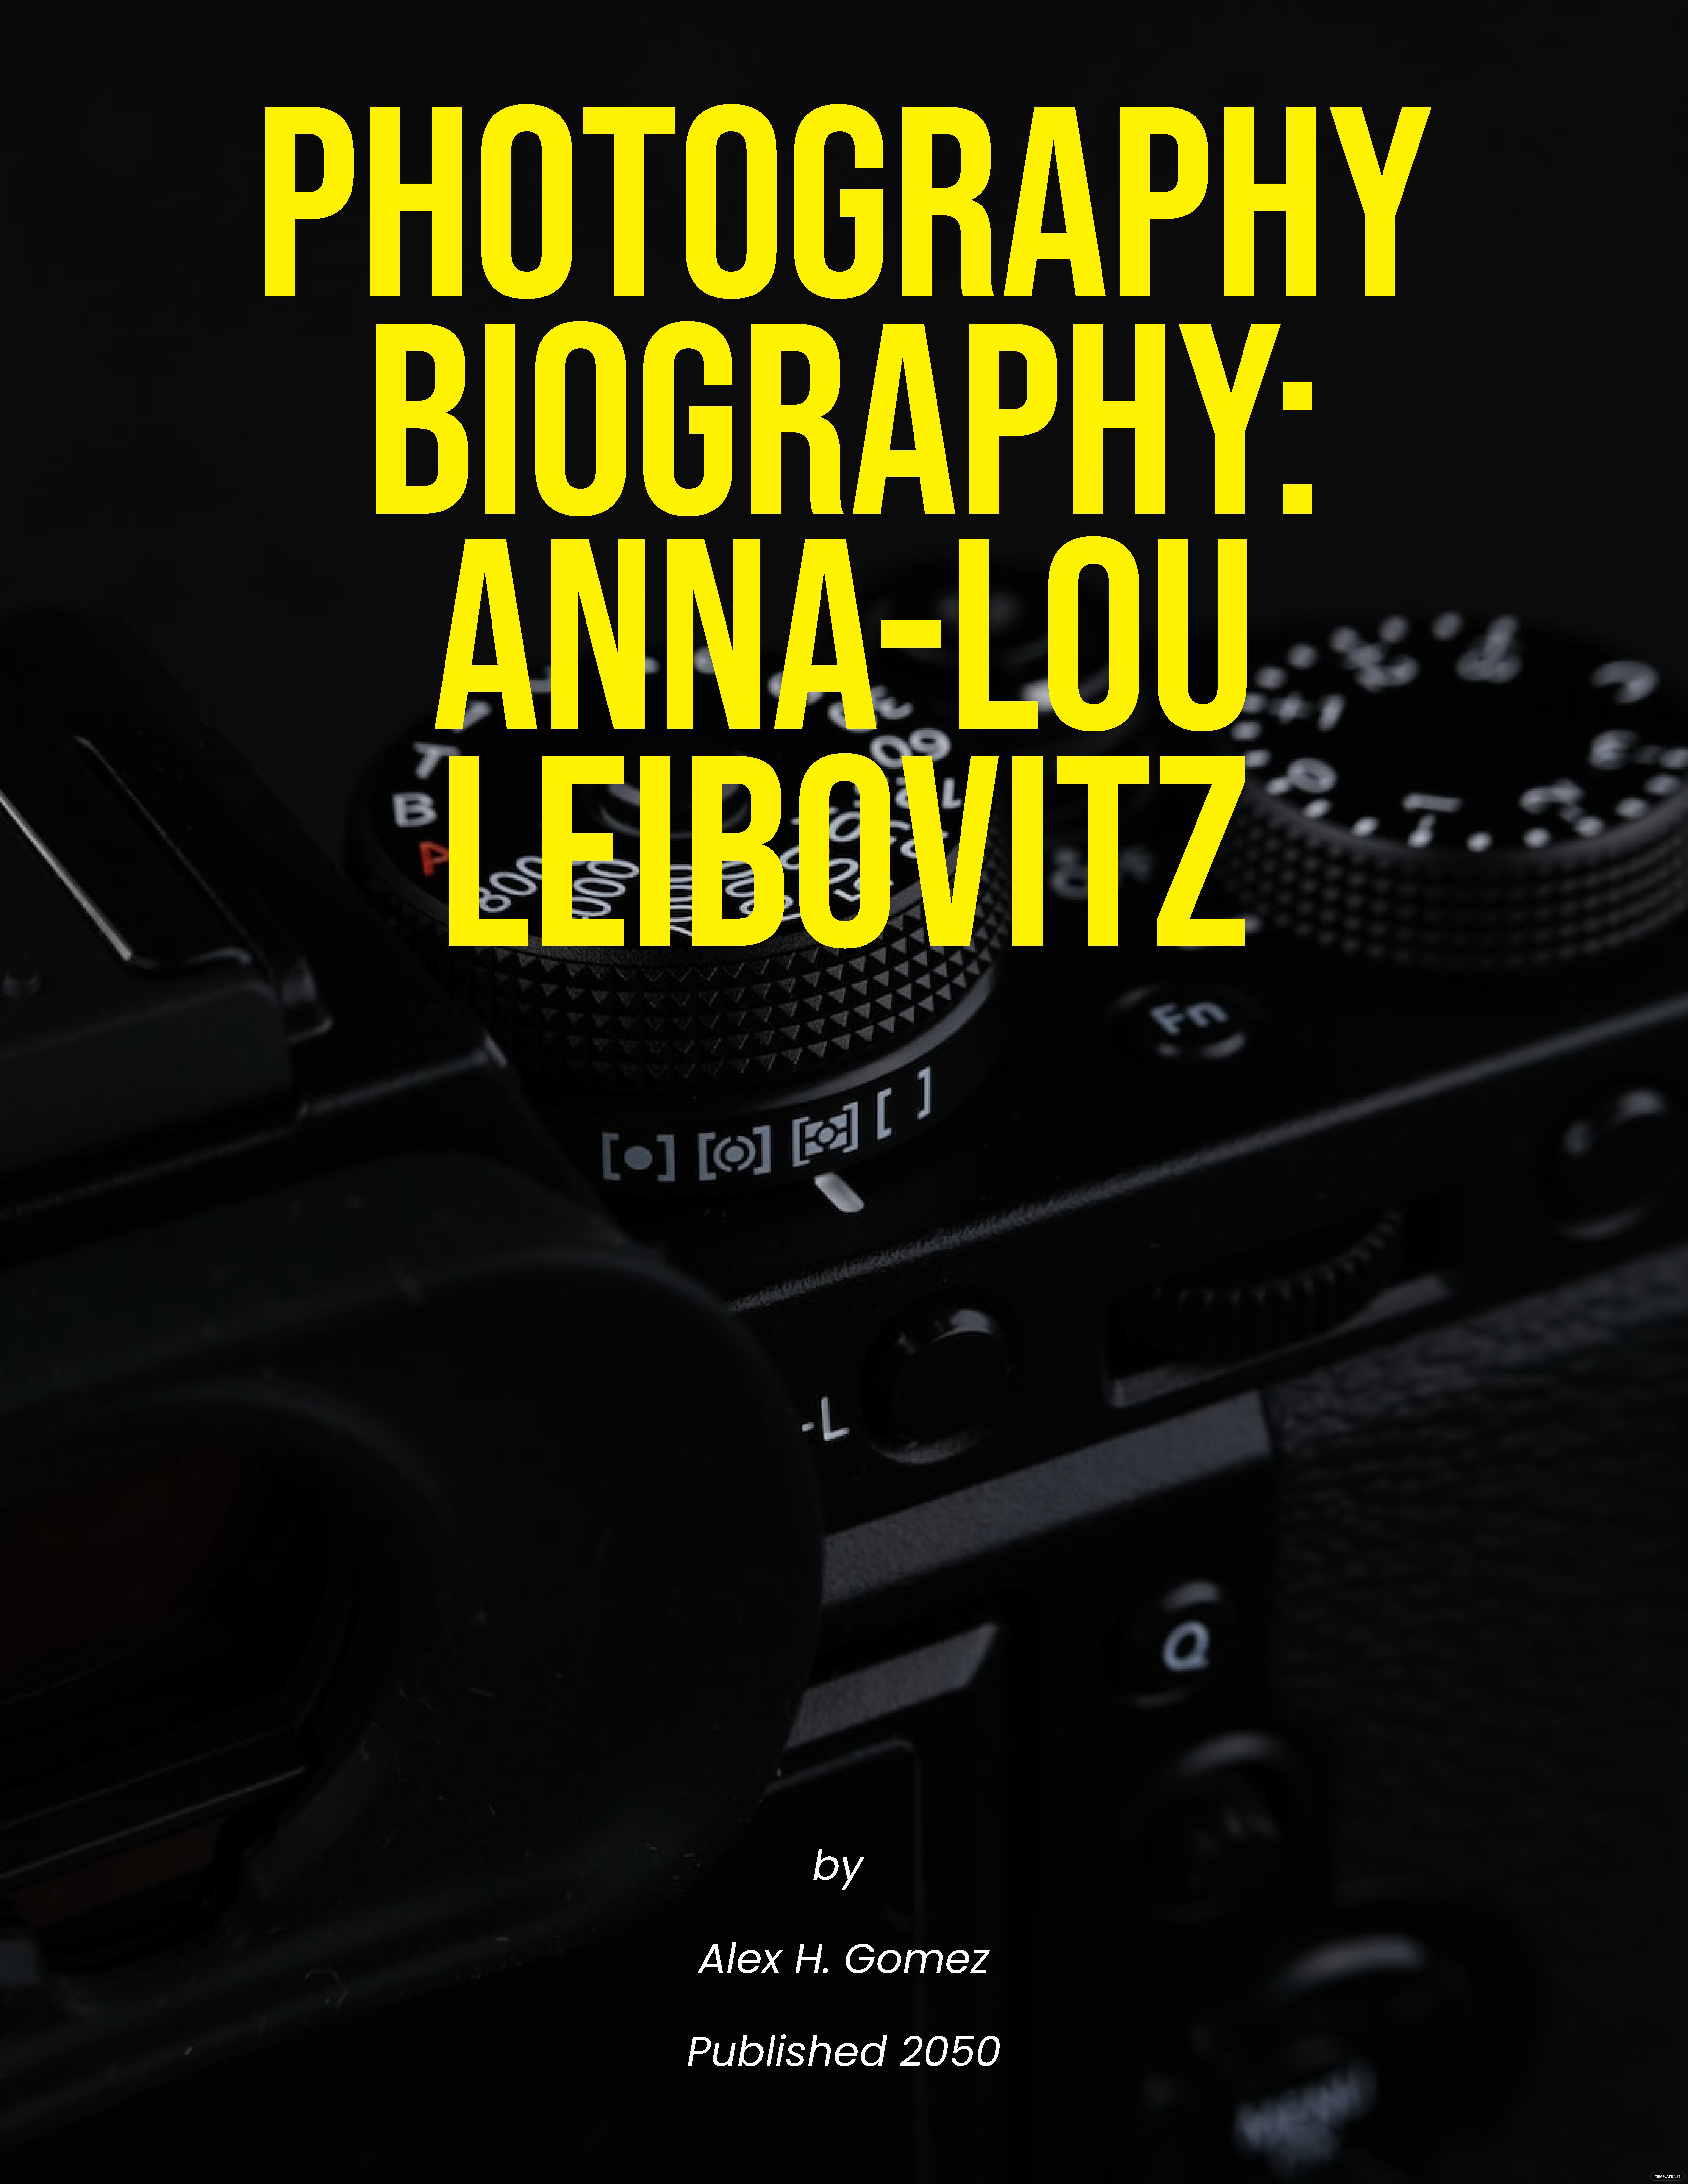 definition of biography in photography